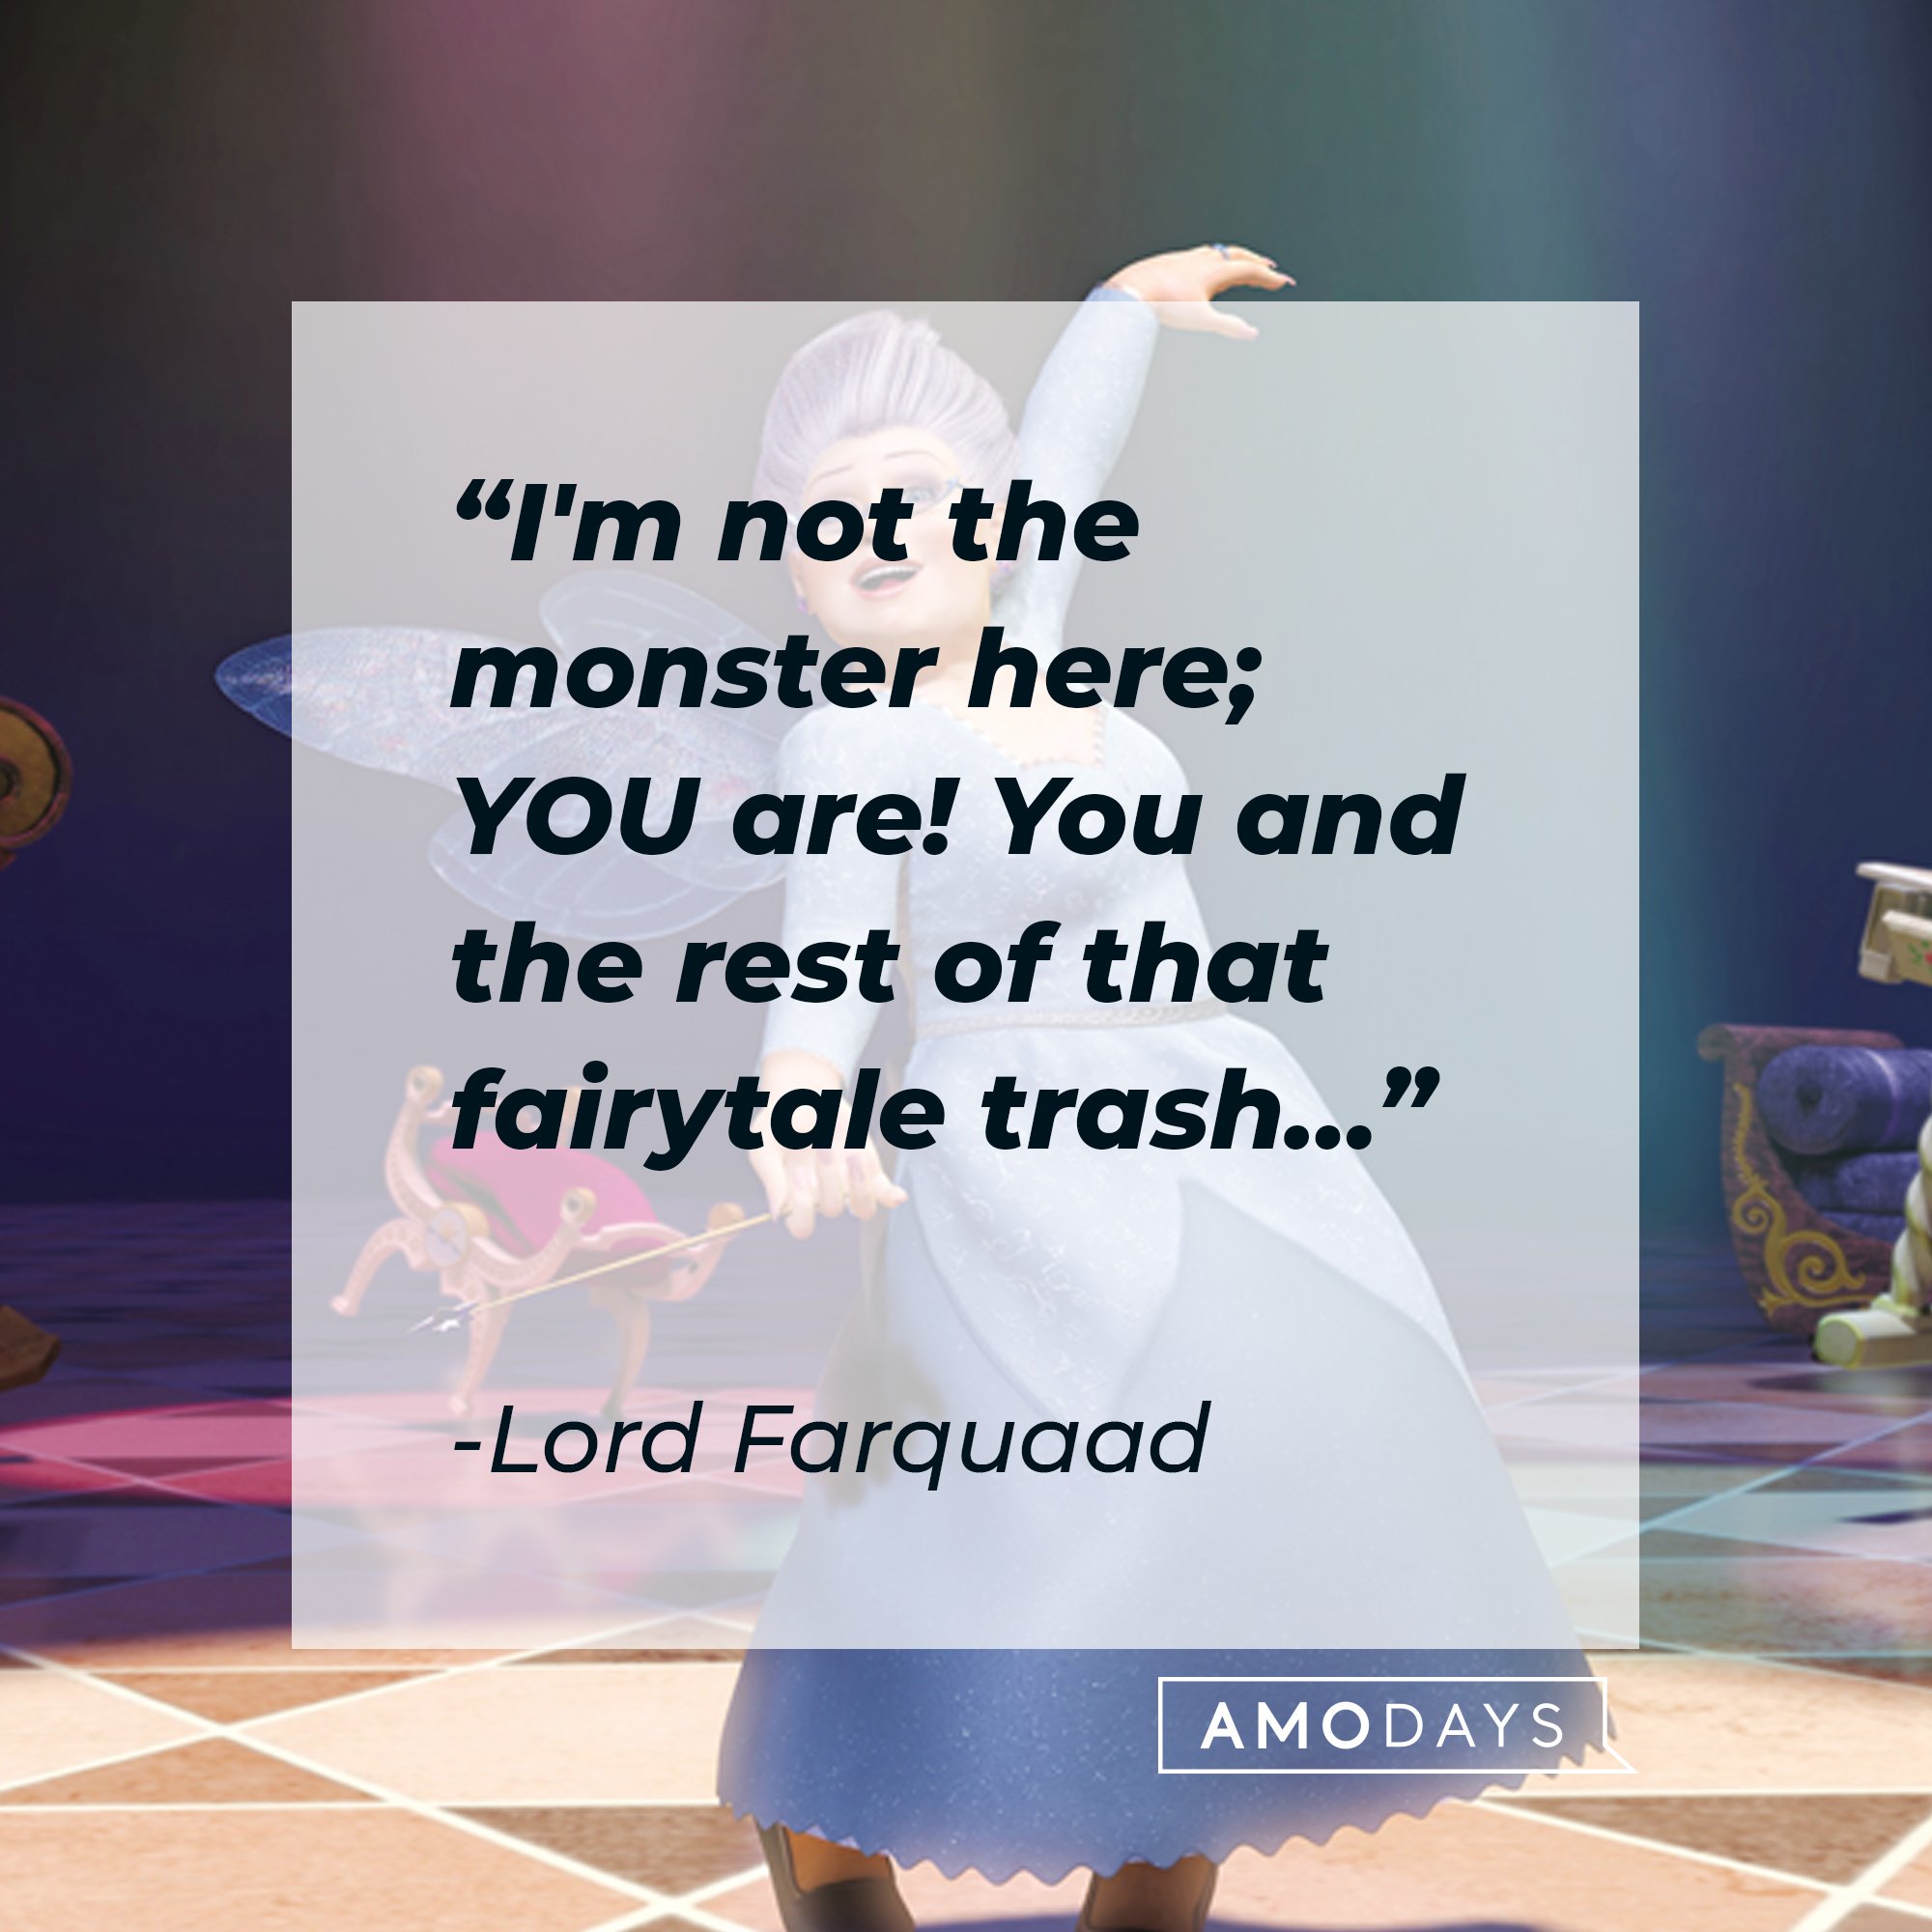 Lord Farquaad's quote: "I'm not the monster here; YOU are! You and the rest of that fairytale trash…” | Image: AmoDays 